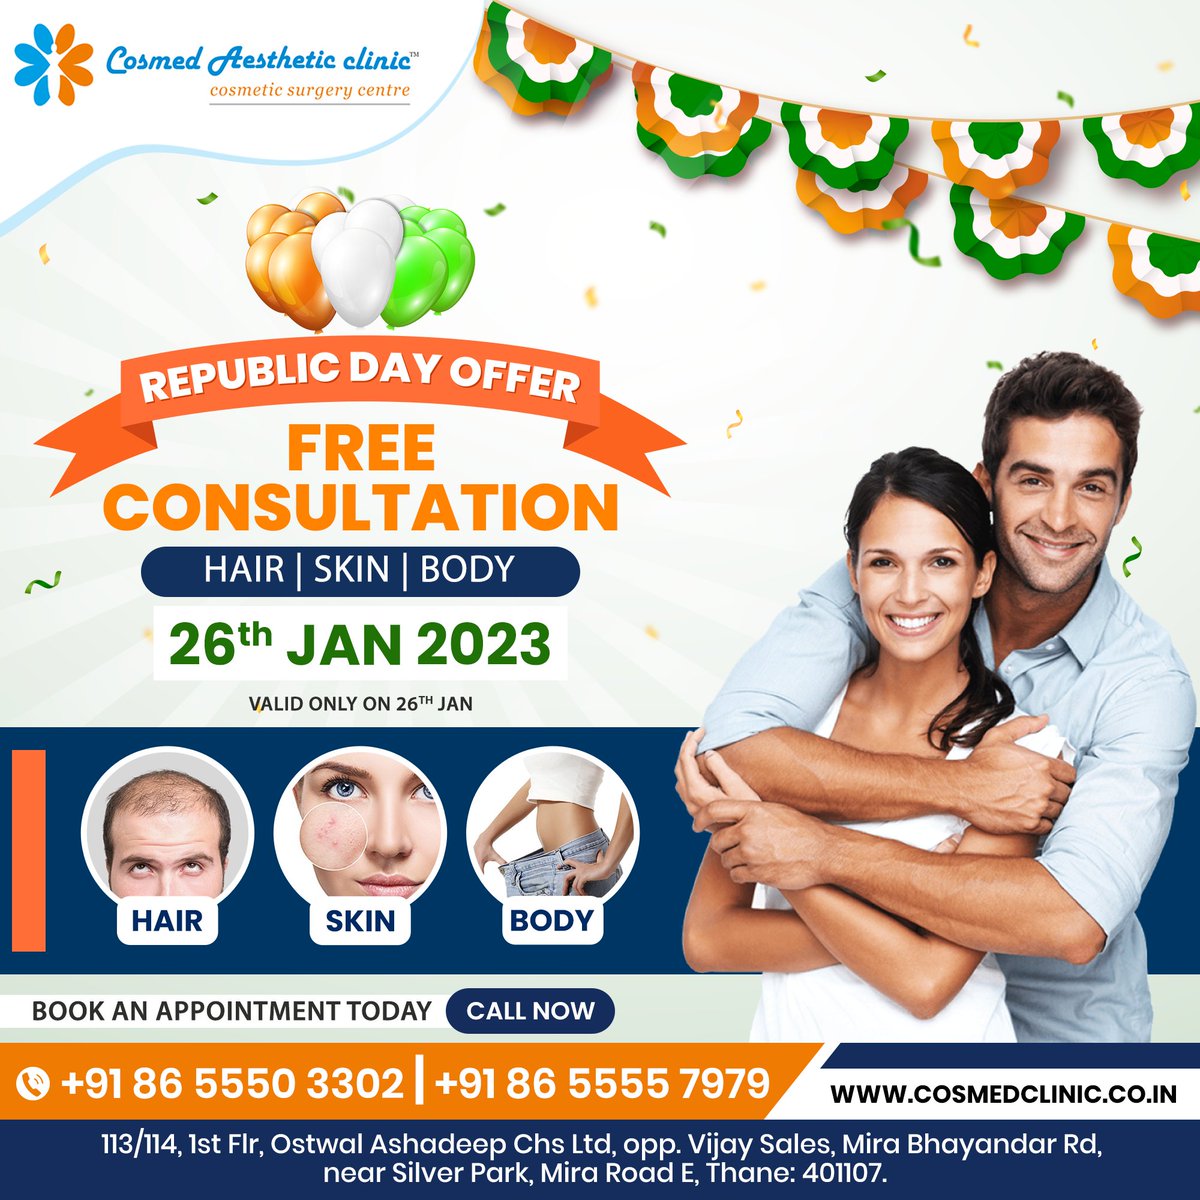 #RepublicDay #Offer Alert

Avail #FREECONSULTATION on #HAIR, #SKIN & #BODY.

Call now!
📞: +91 86 5550 3302 | +91 86 5555 7979
📌: #MiraRoad, #Thane, #Mumbai
🌐: cosmedclinic.co.in

#CosmedClinic #republicdayoffer #republicdayspecial #mumbaigirls #mumbaibeauty #thanekar